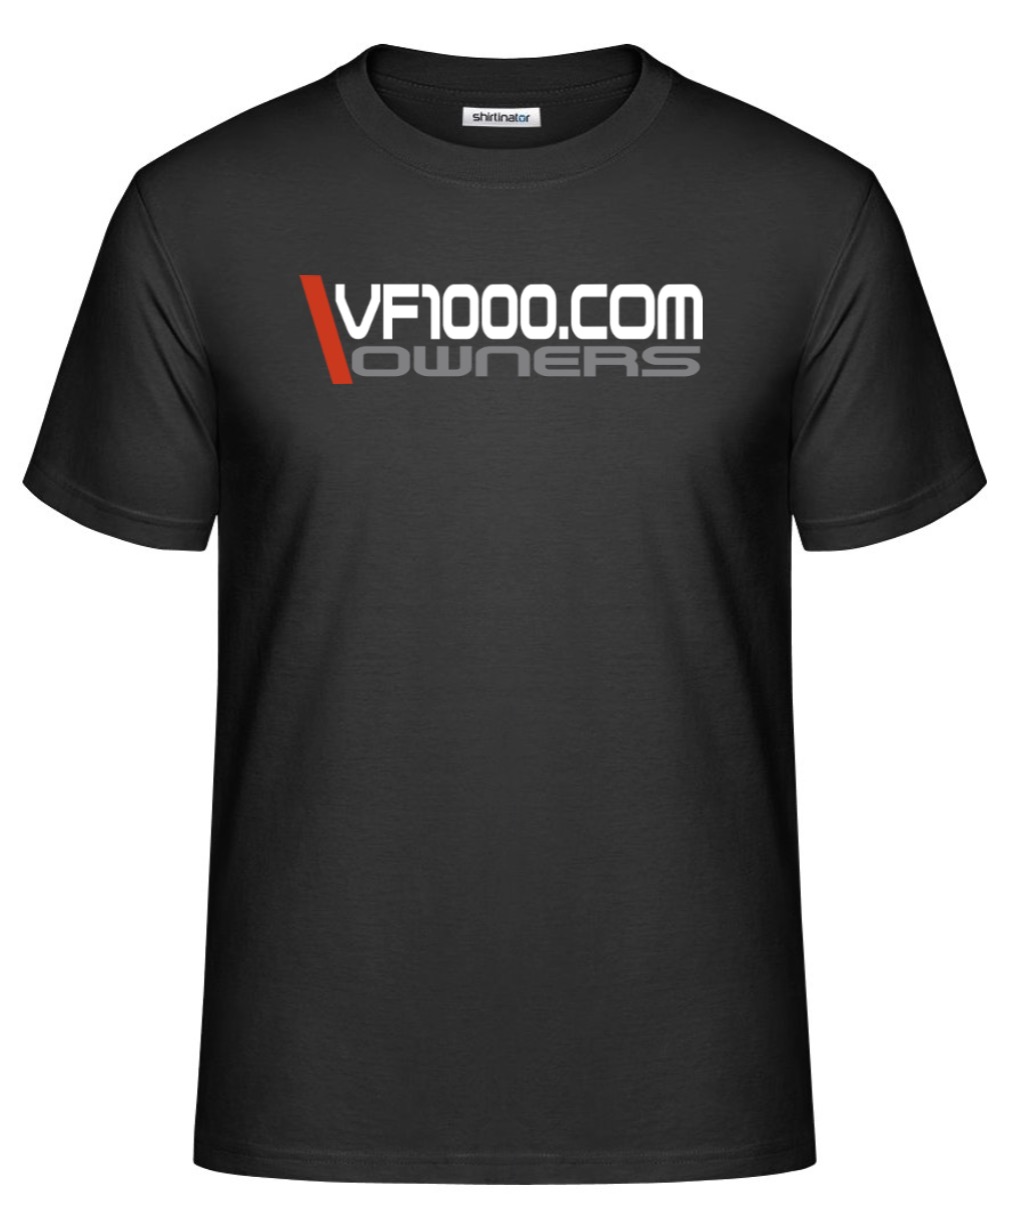 VF1000 Owners Tee Shirt